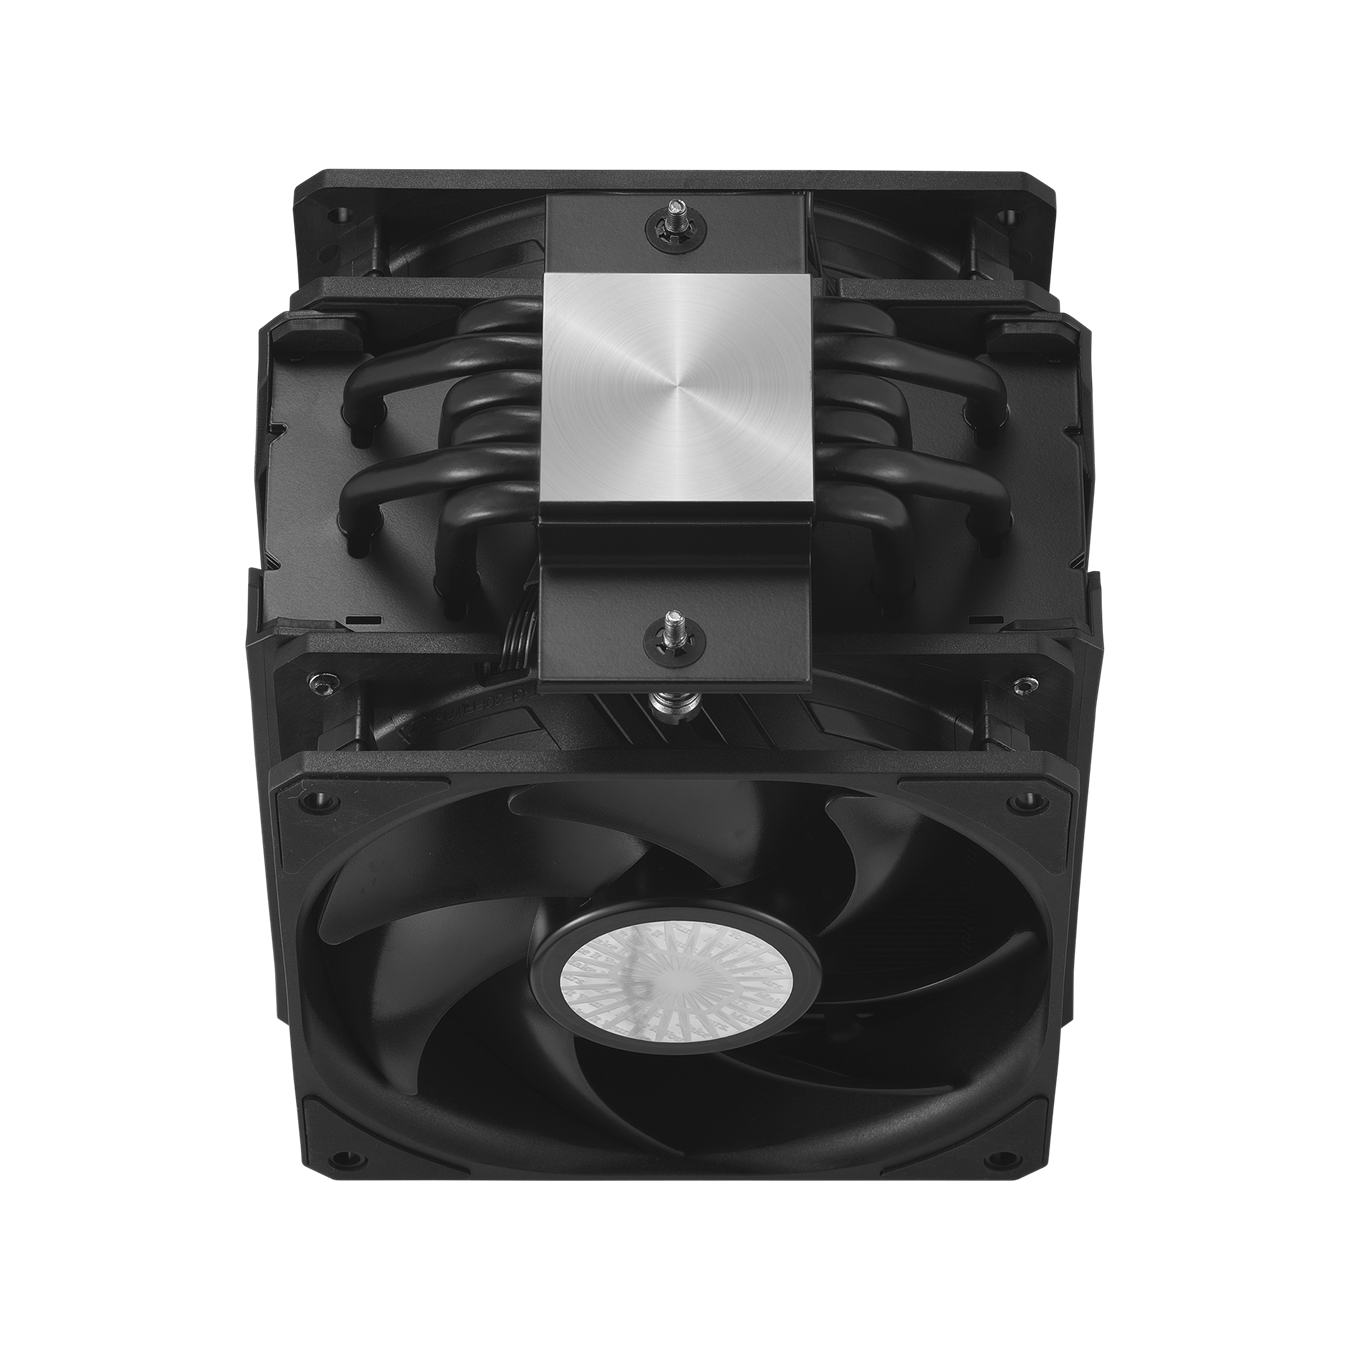 MasterAir MA612 Stealth - 6 heat pipes and nickel-plated copper base provides maximum coverage for optimal cooling